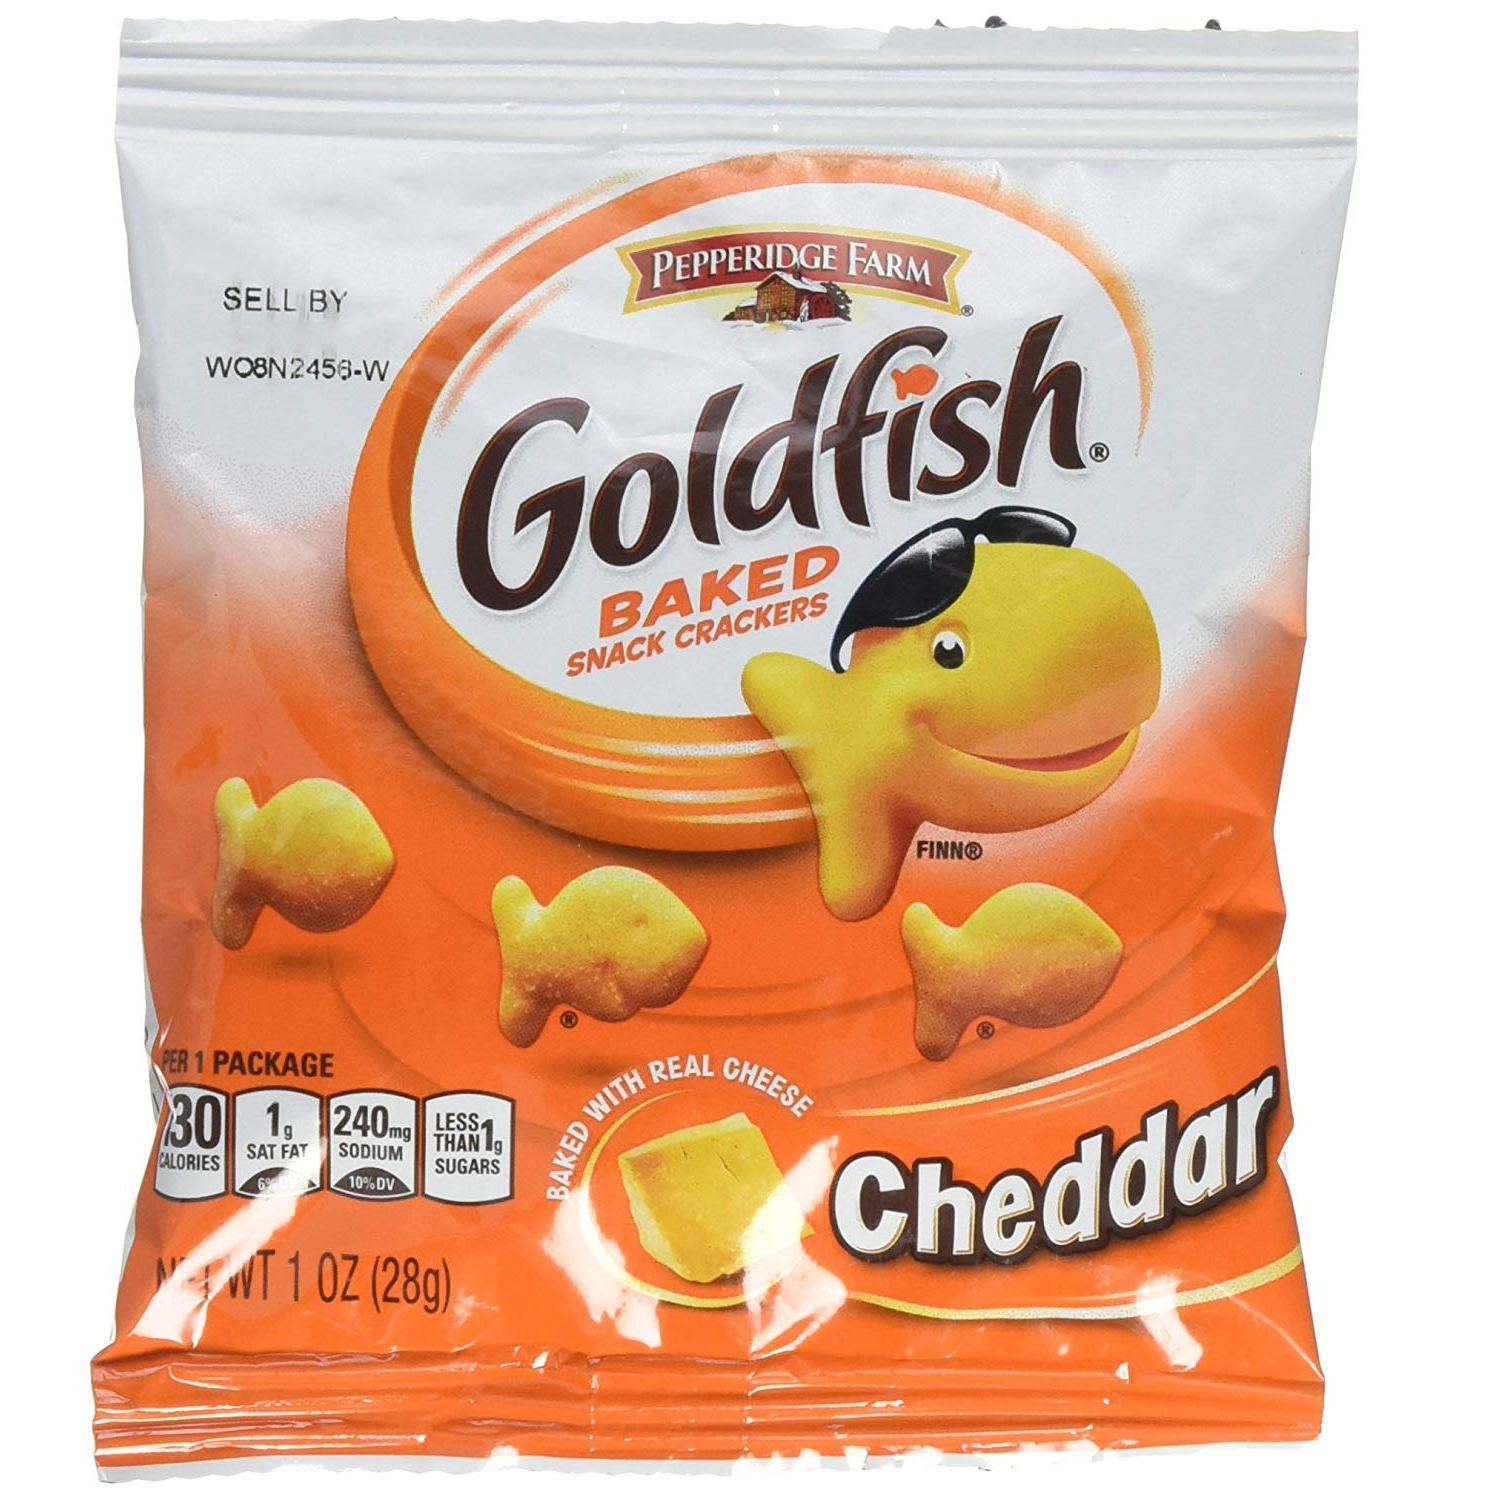 Pepperidge Farm Cheddar Goldfish Crackers 45 Count Only $6.48 Shipped!